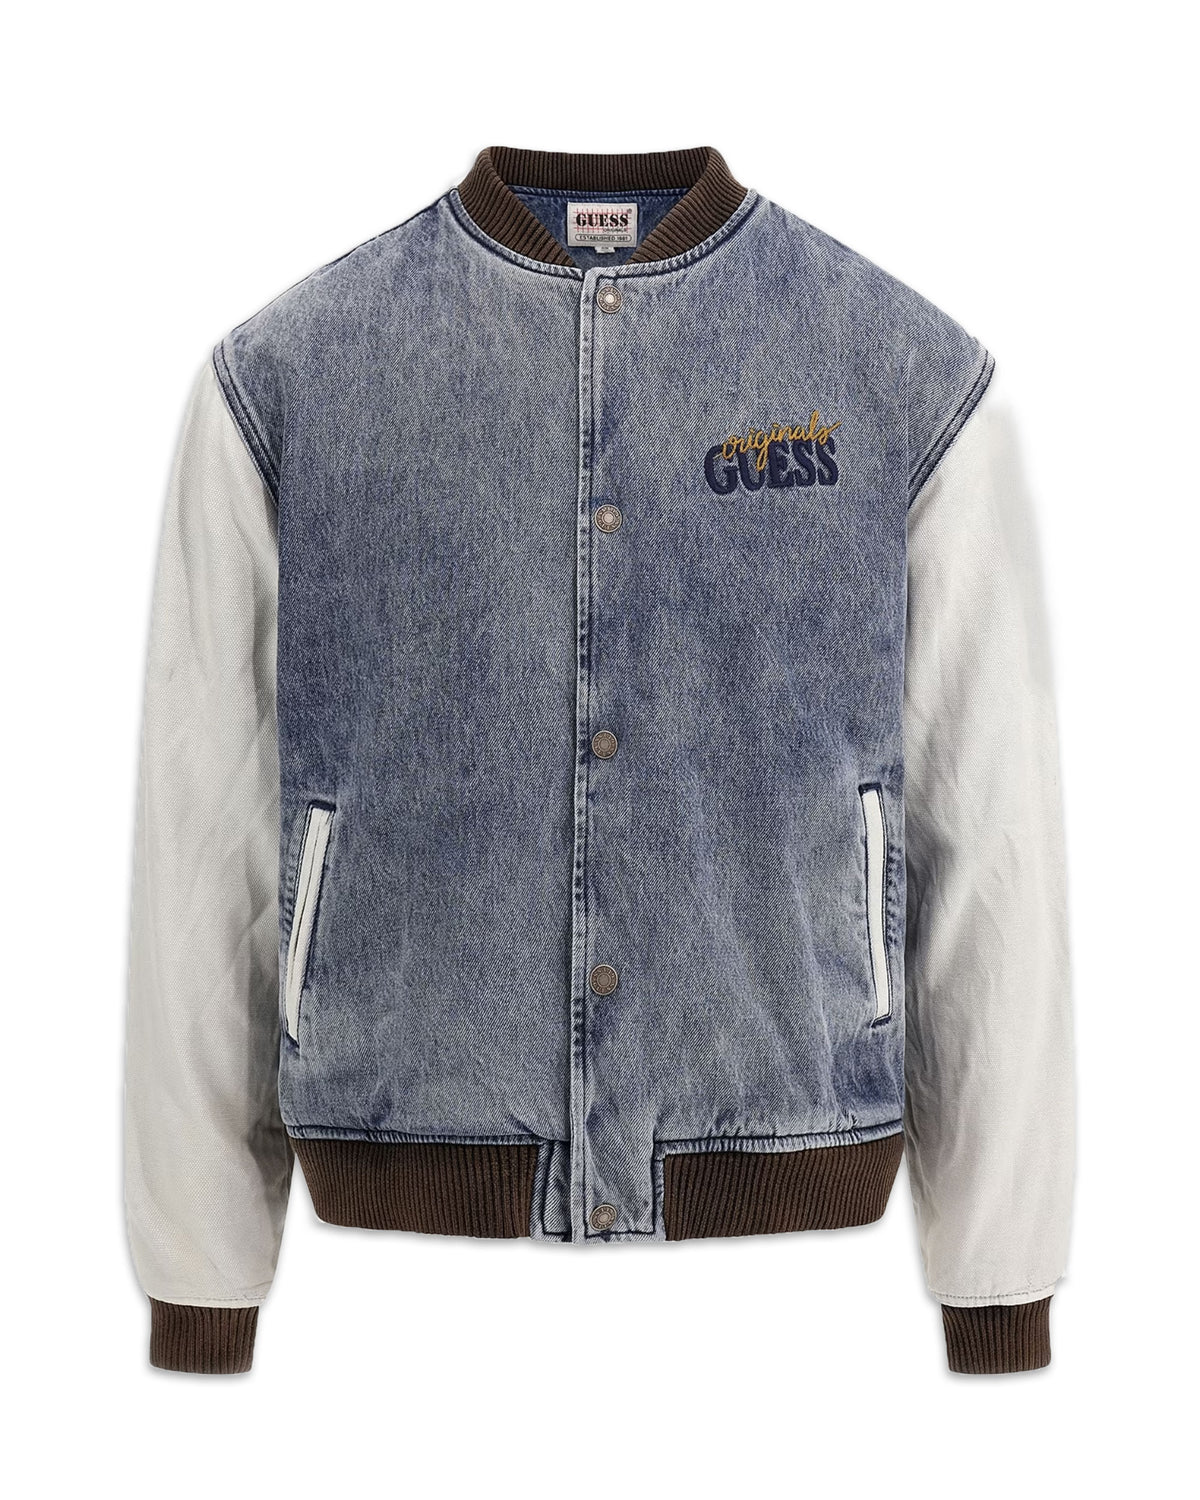 Guess Originals Giacca bomber in jeans misto cotone